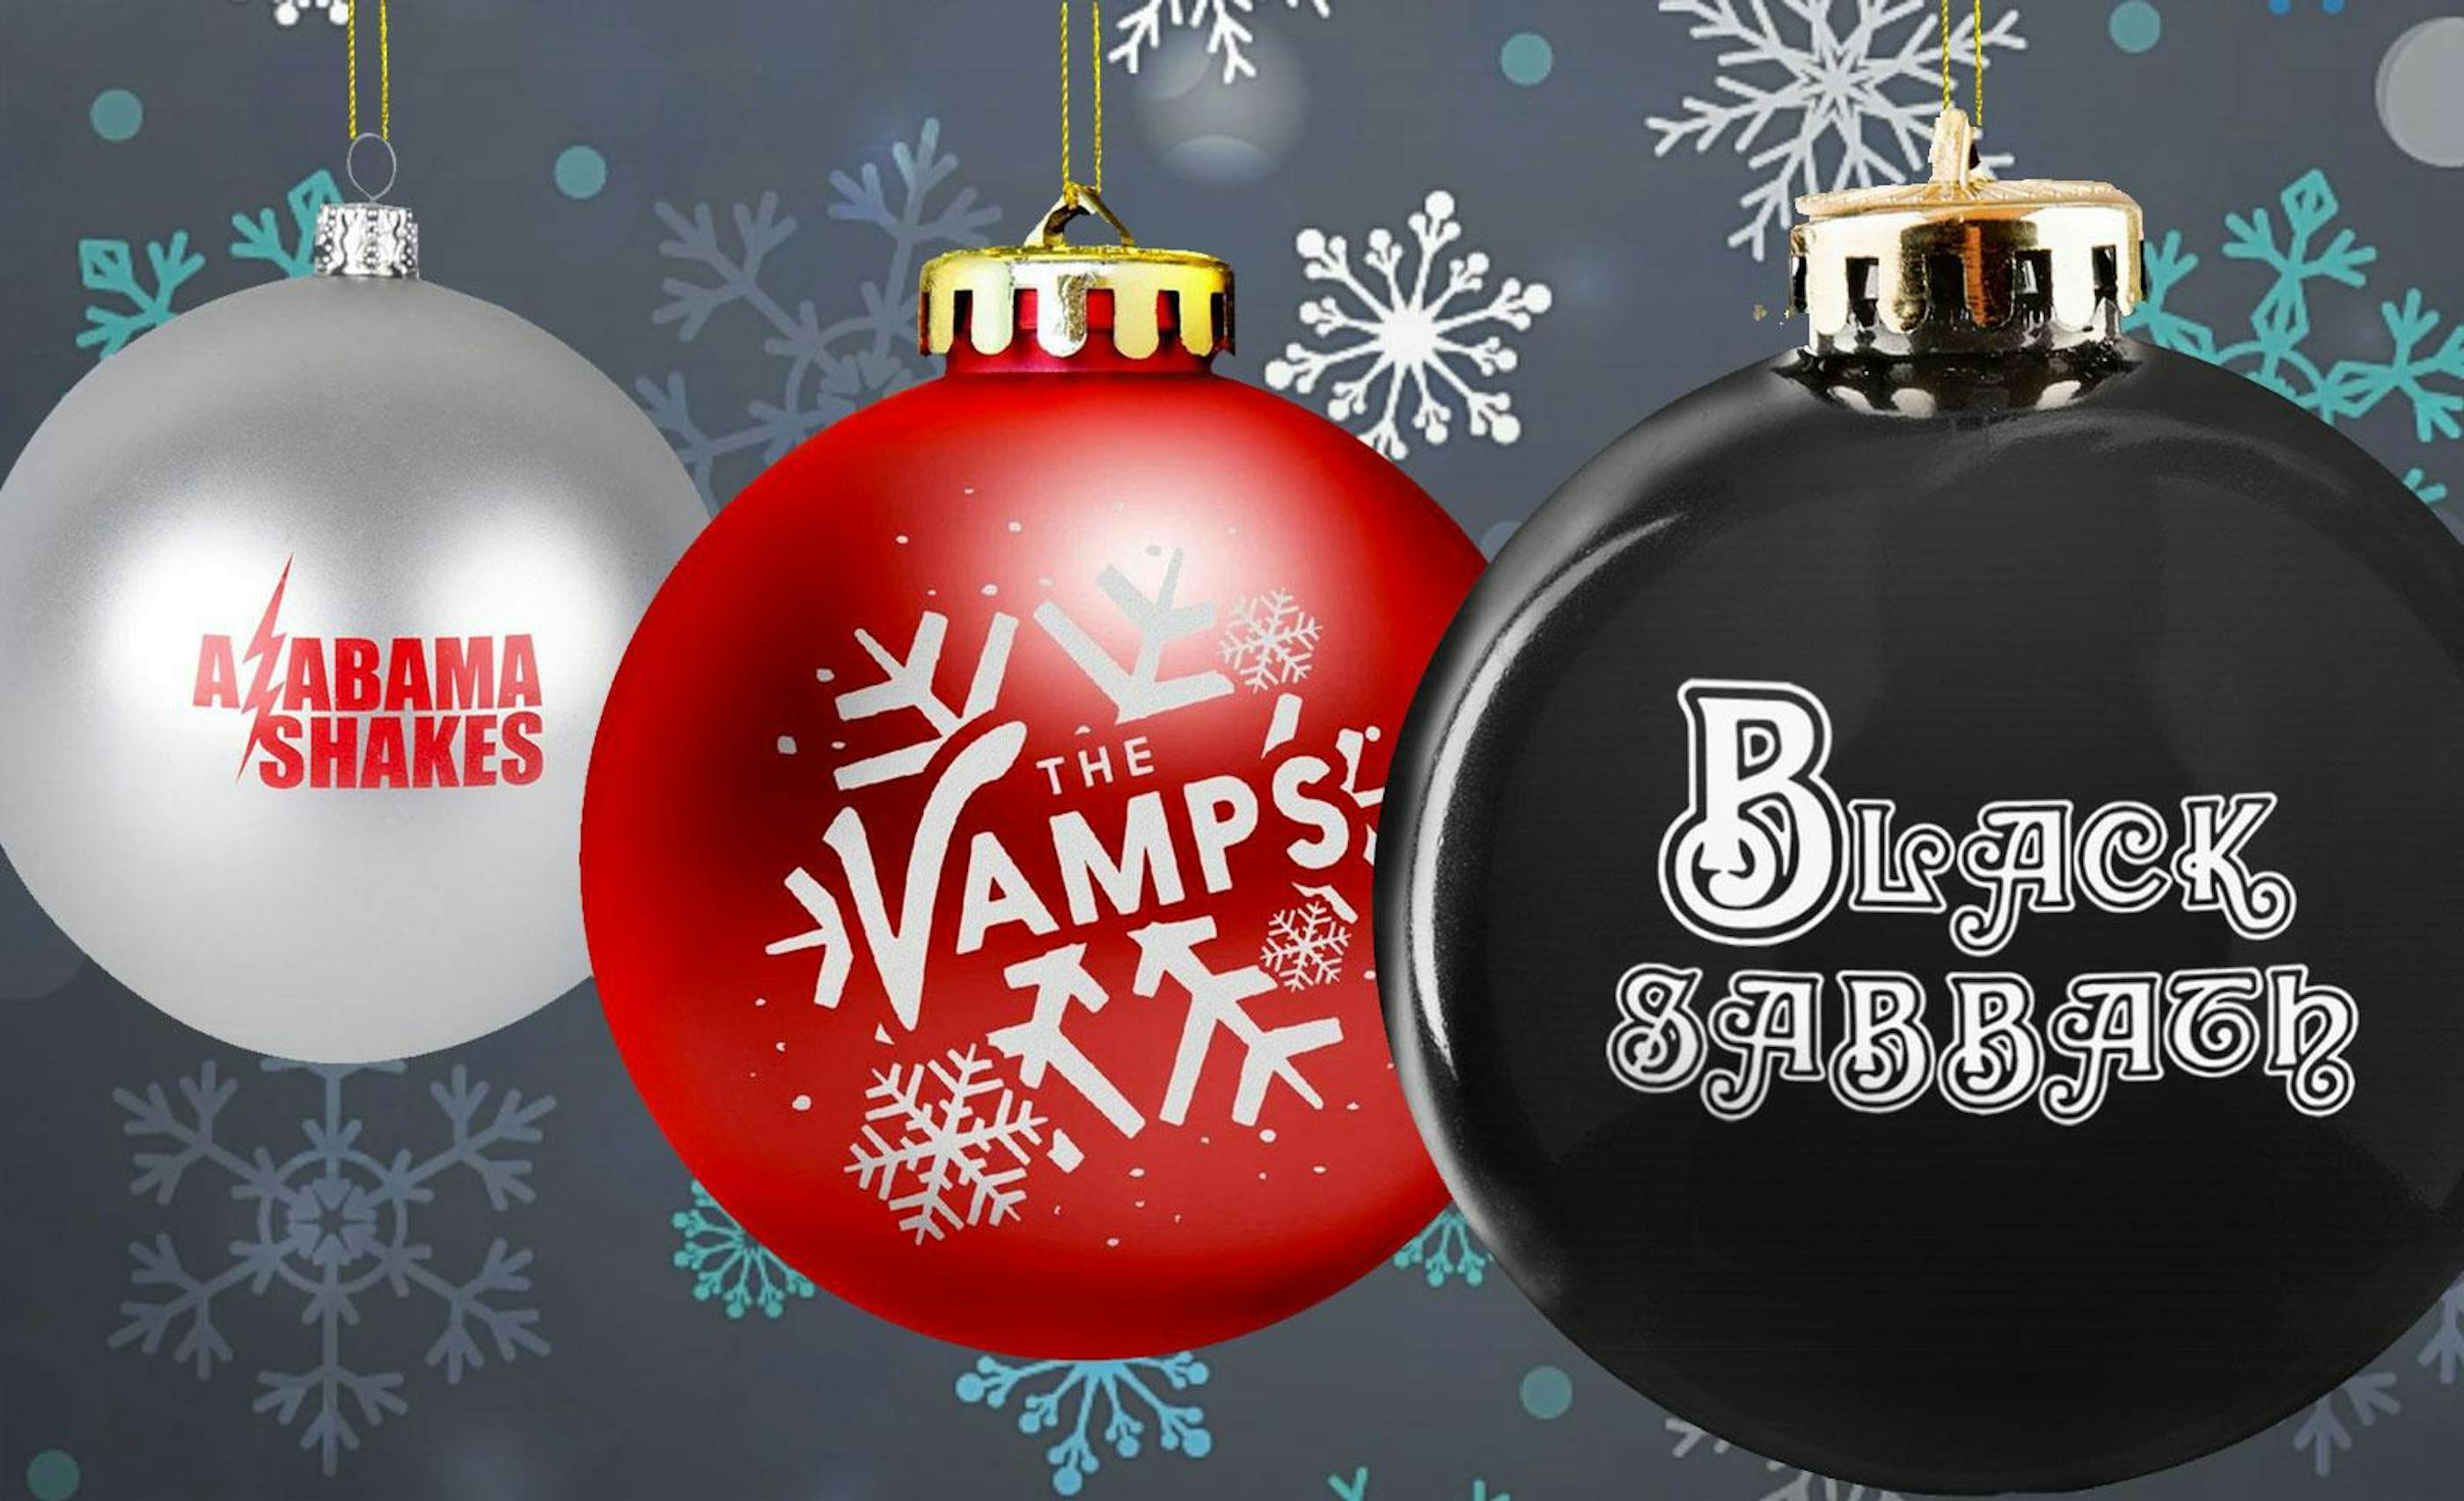 Ornaments, Stockings & More from Your Favorite Artists!